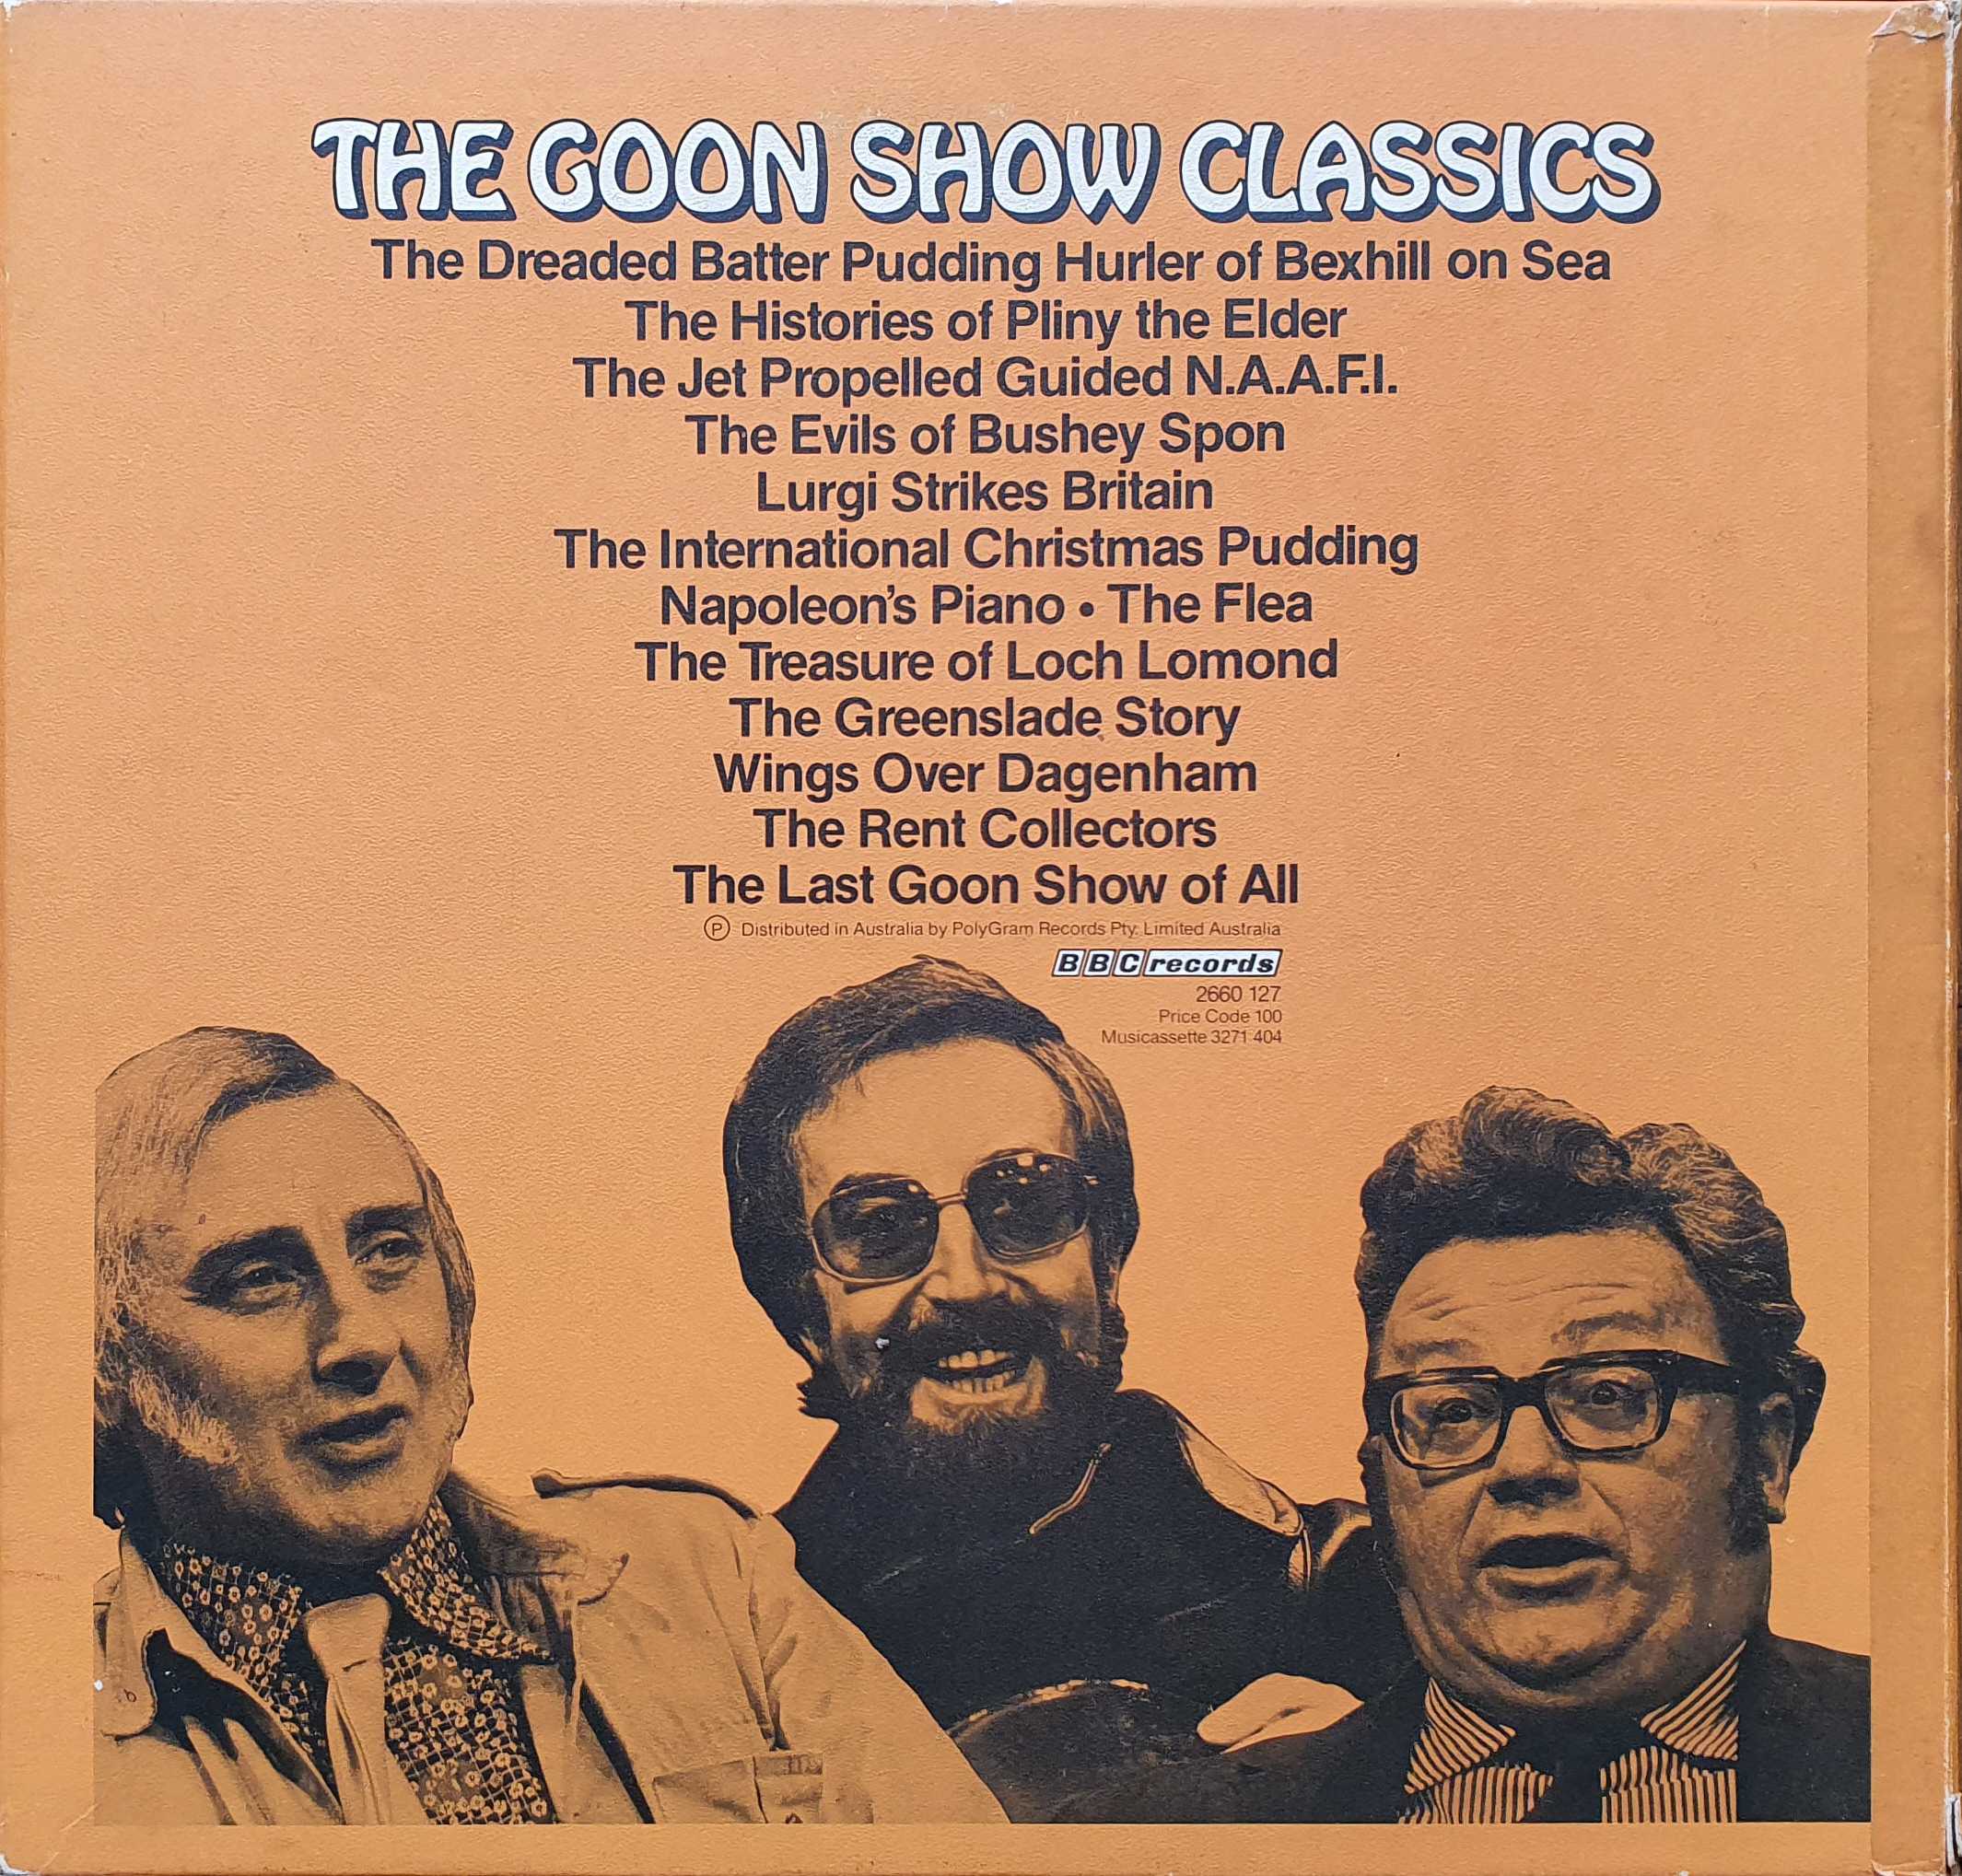 Picture of 2660 127 The Goon Show classics by artist The Goons from the BBC records and Tapes library